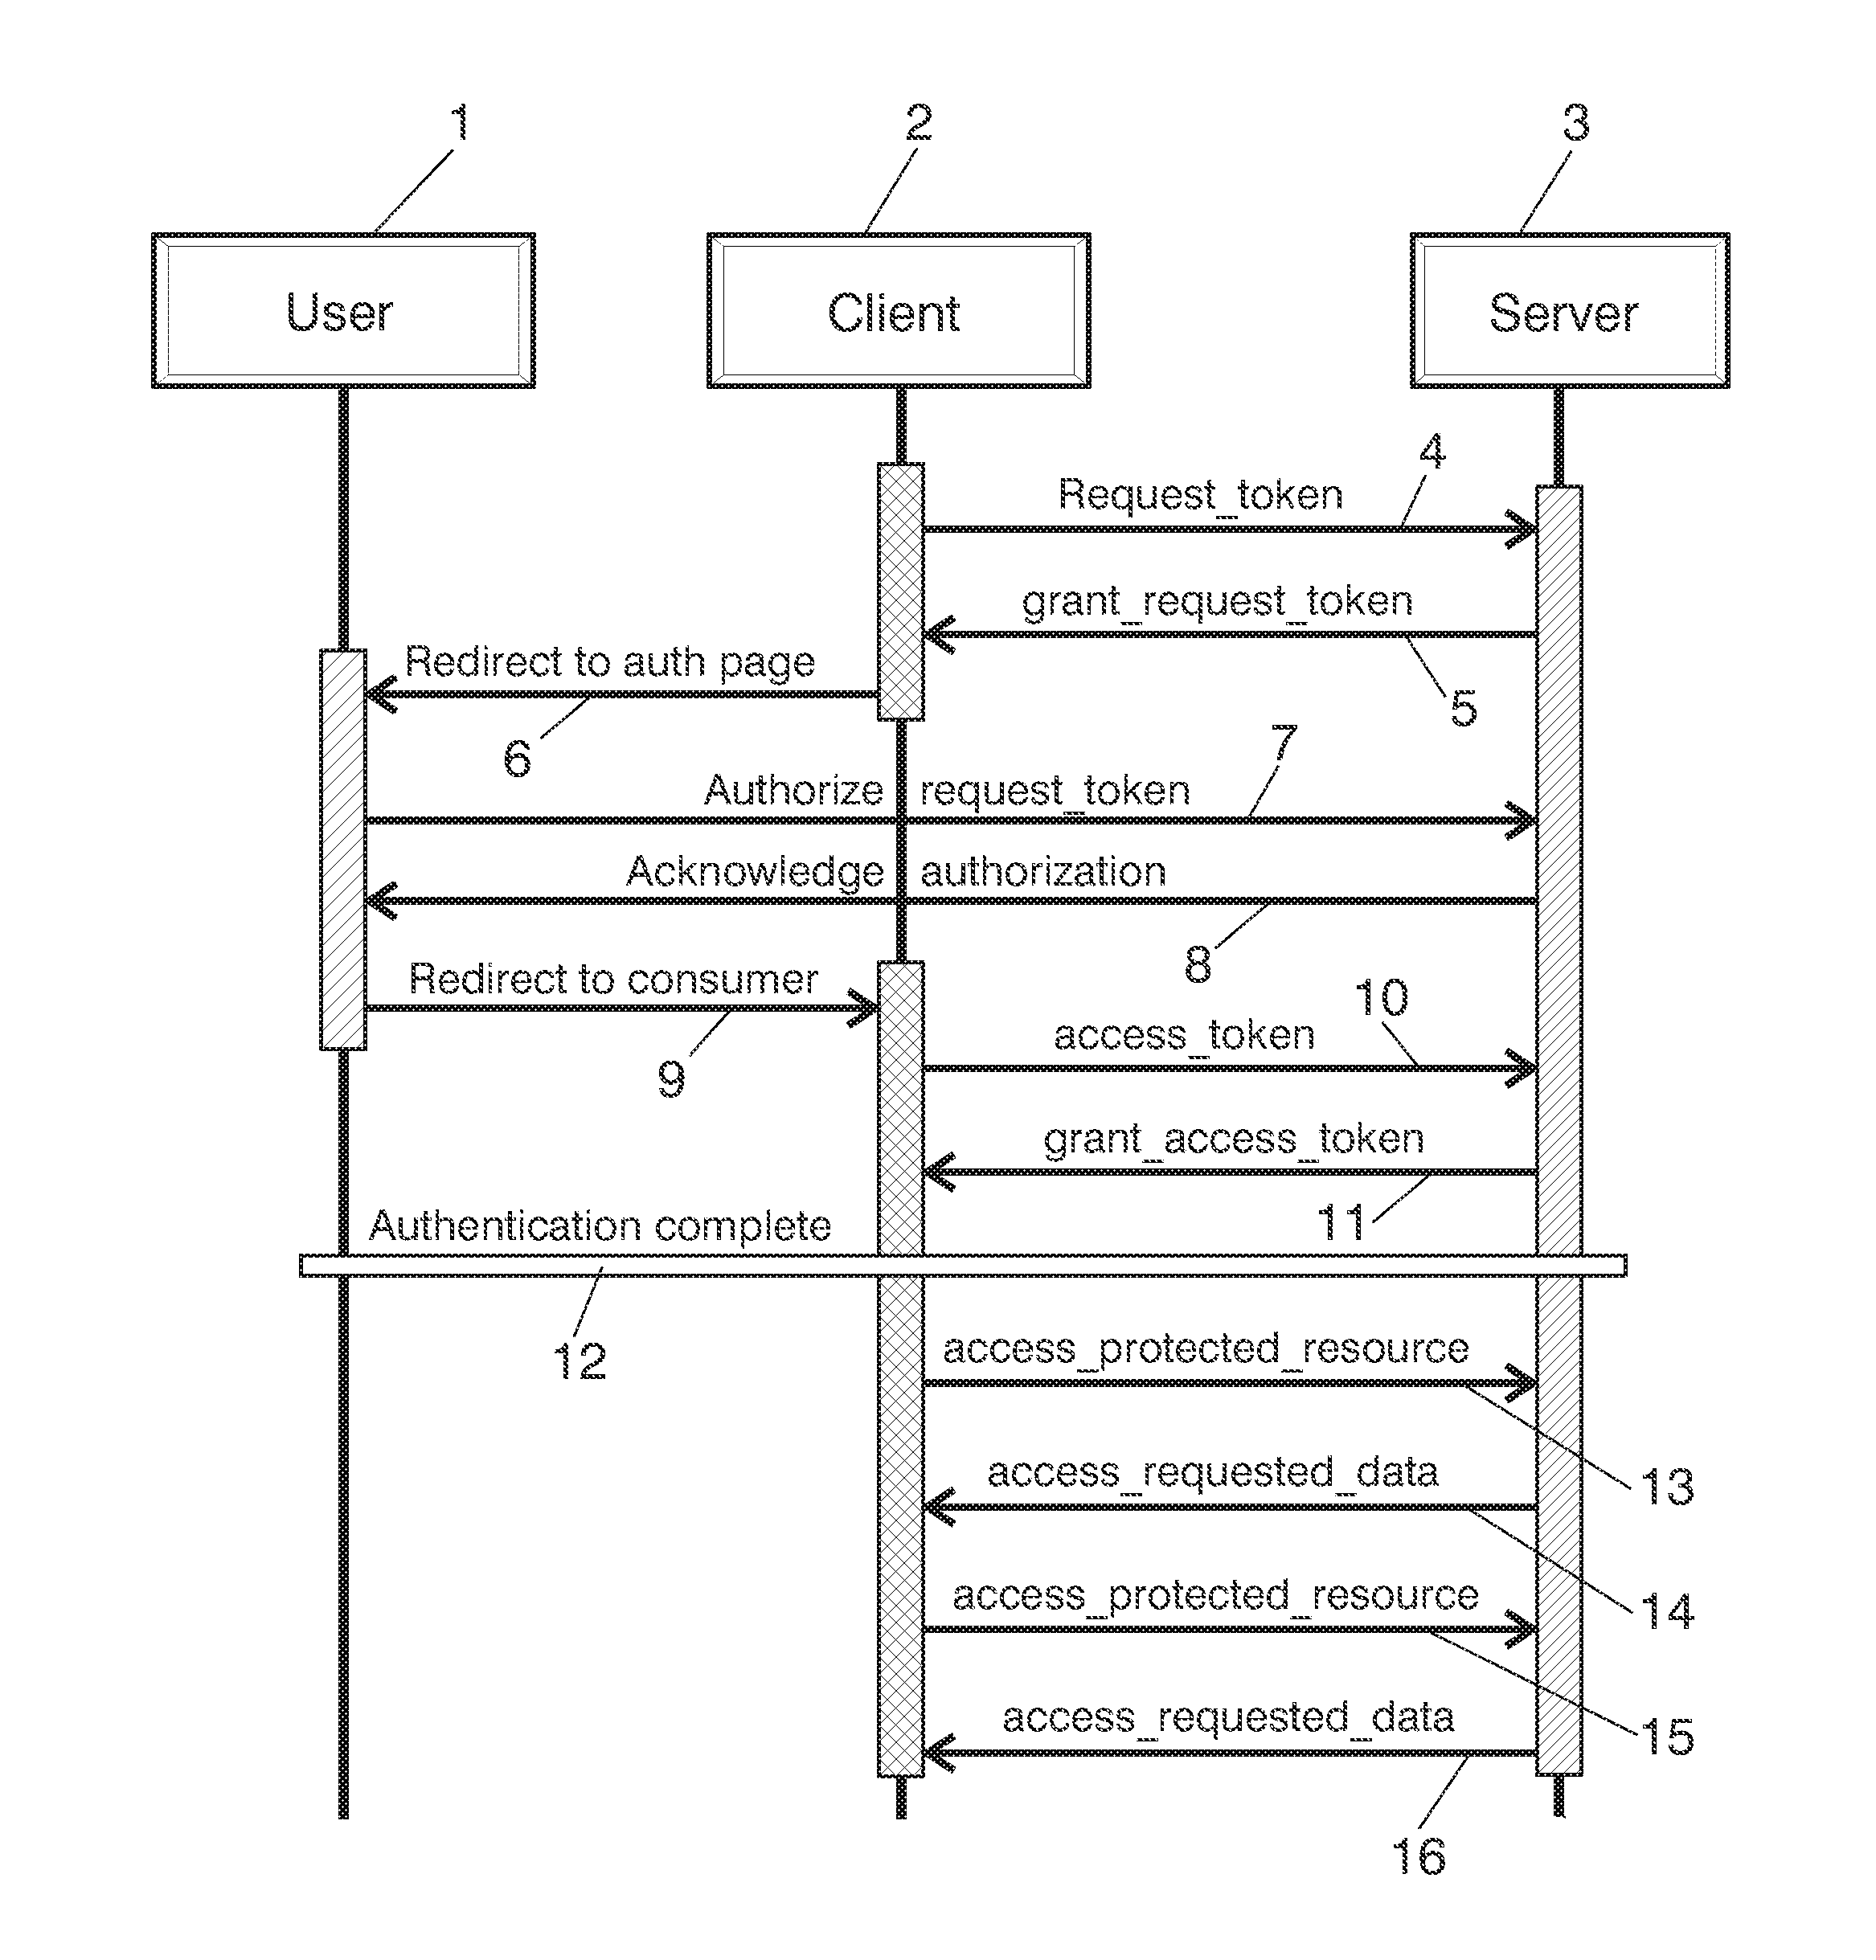 Method for authorizing access to protected content